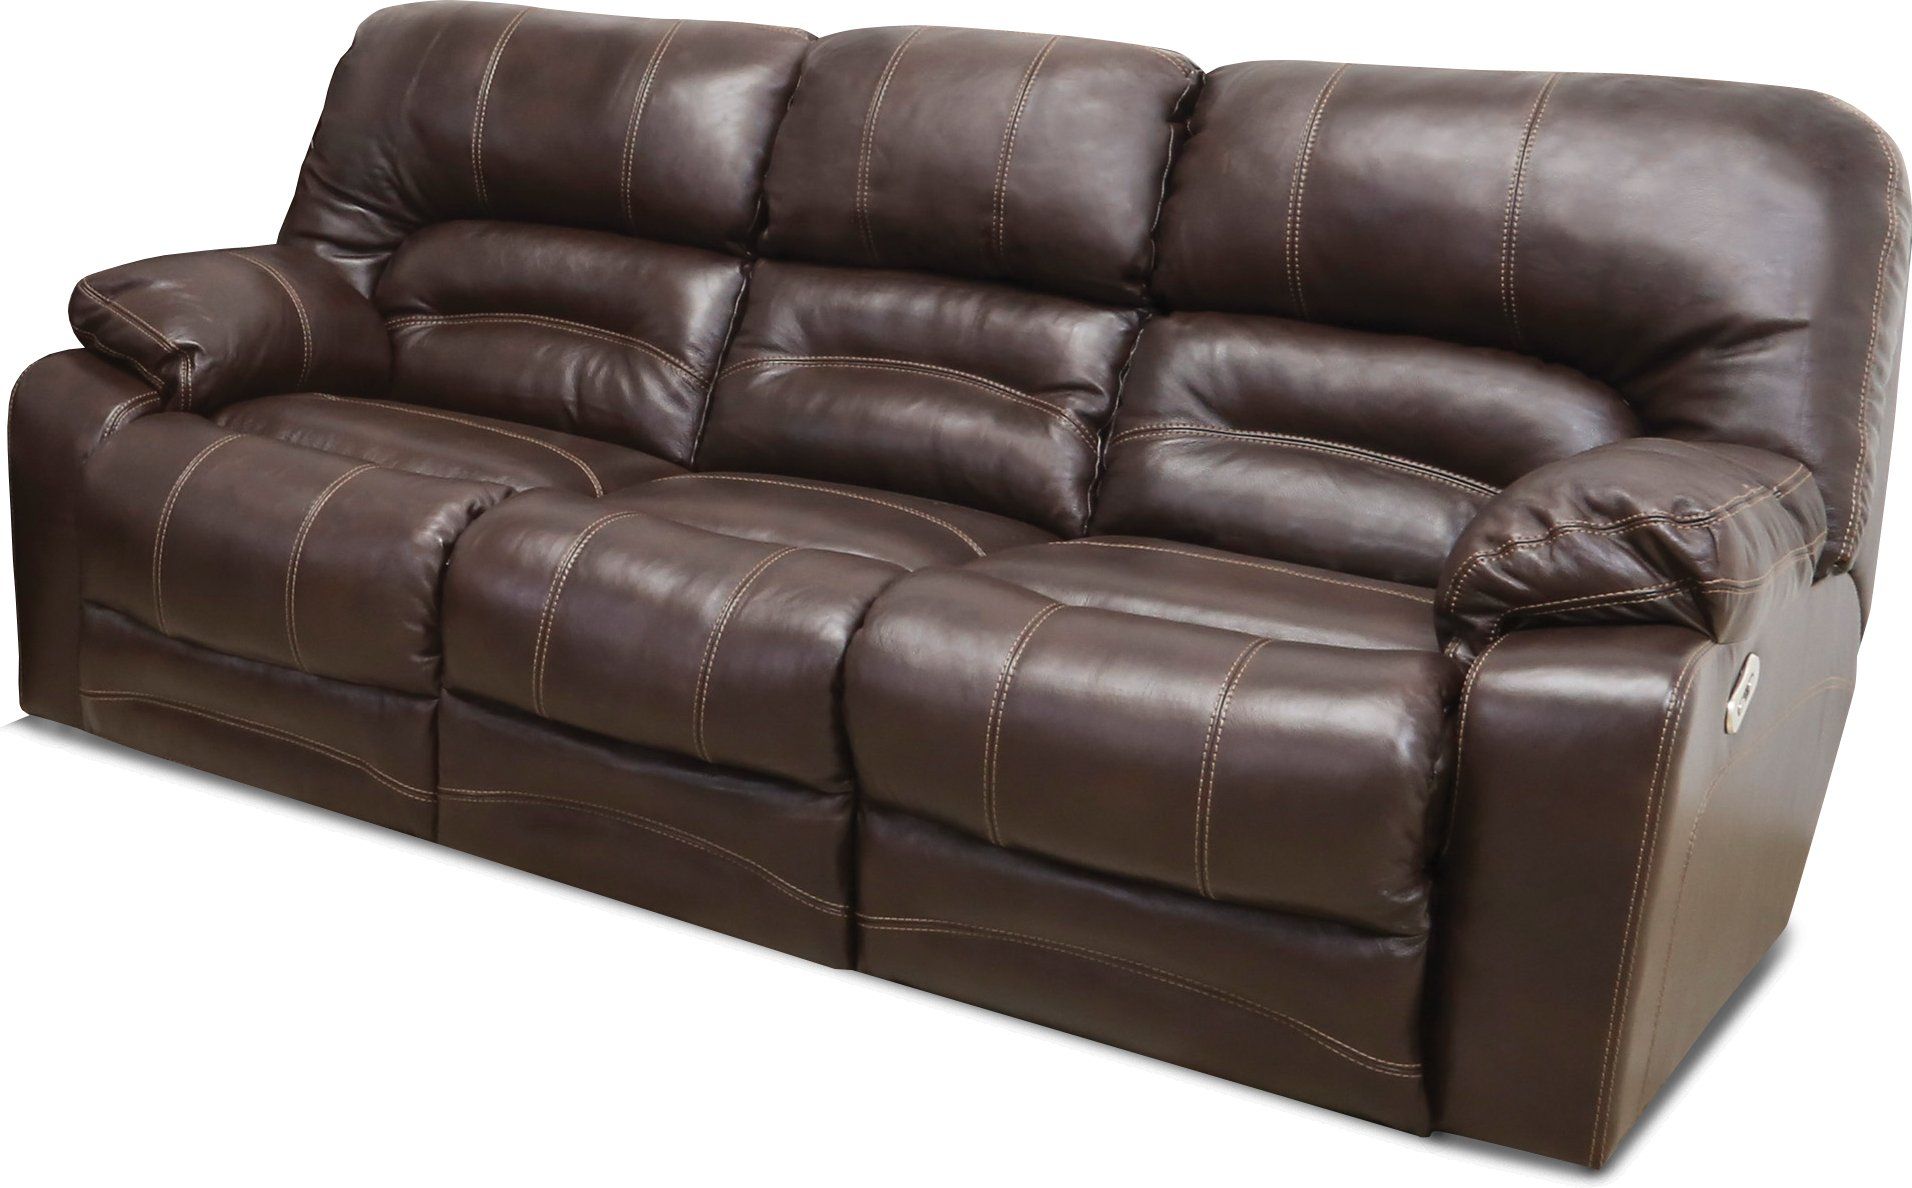 Chocolate Brown Leather Power Reclining Sofa & Loveseat – Legacy | Rc Inside Sofas In Chocolate Brown (Gallery 2 of 20)